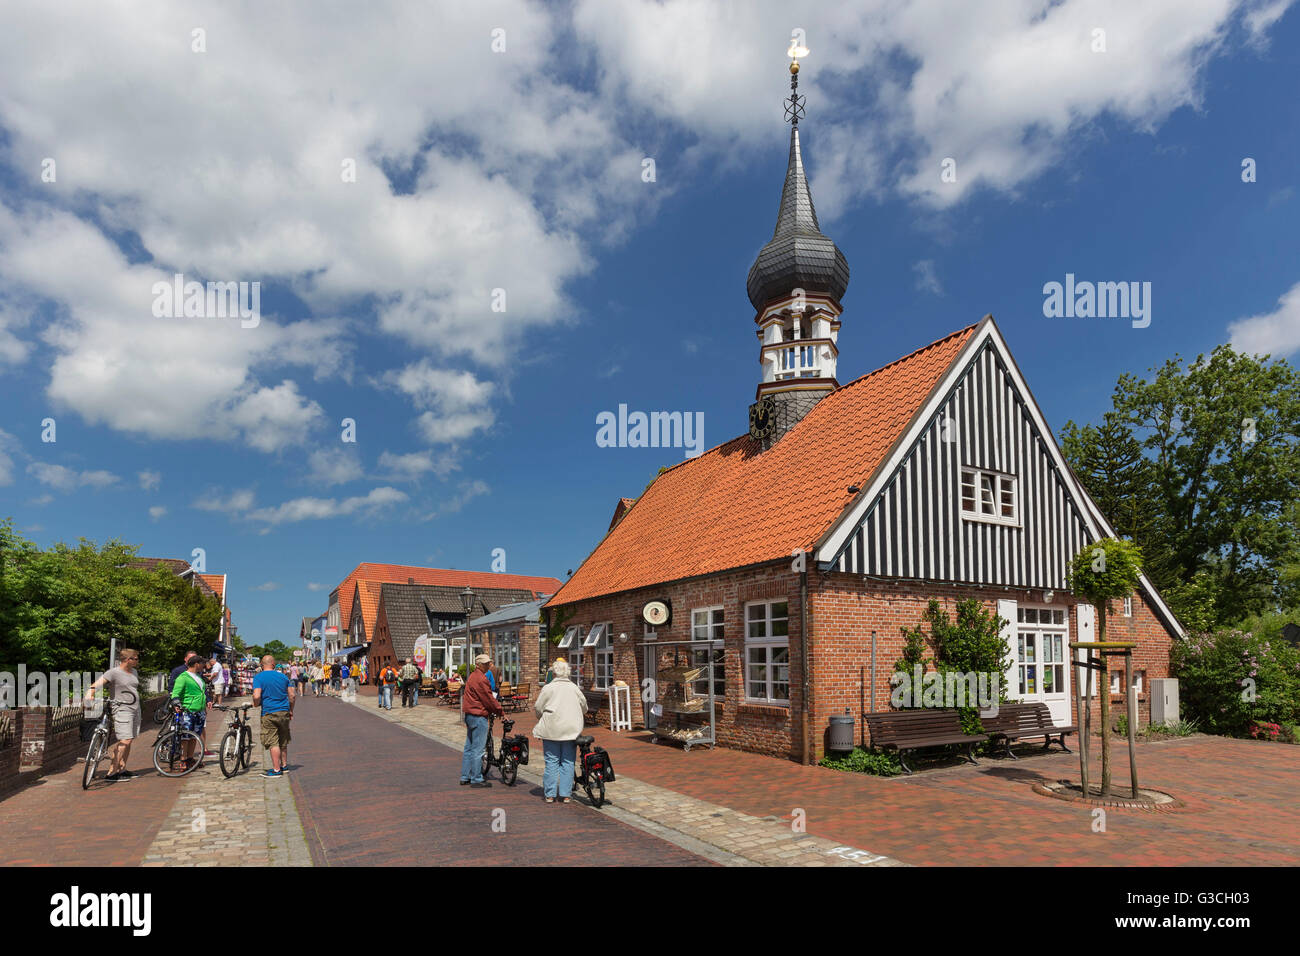 'Muschelmuseum' of Hooksiel with onion-domed tower, former 'Künstlerhaus', school, town hall, tourist information, in Hooksiel, district of the municipality Wangerland, district of Friesland, Stock Photo